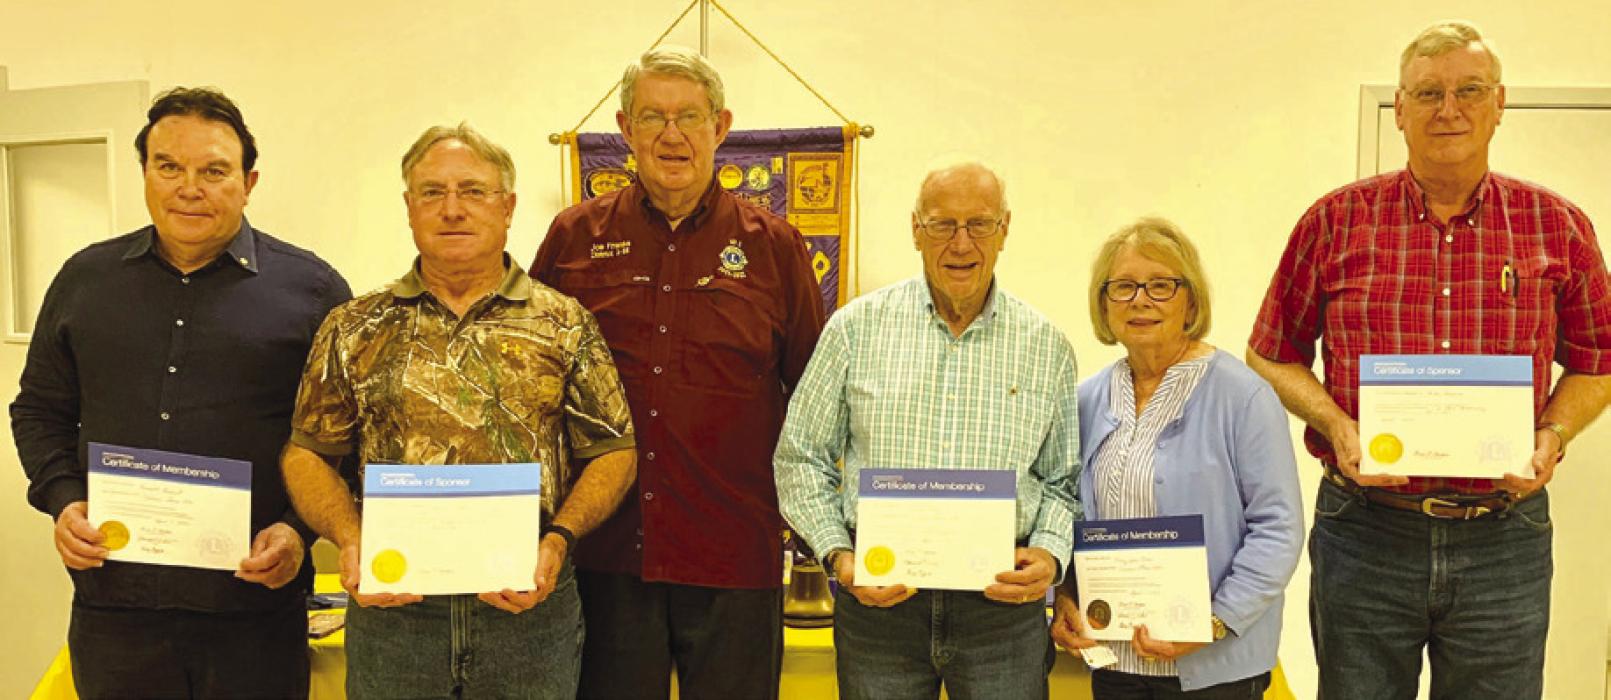 Carmine Lions Club Welcomes Four New Members